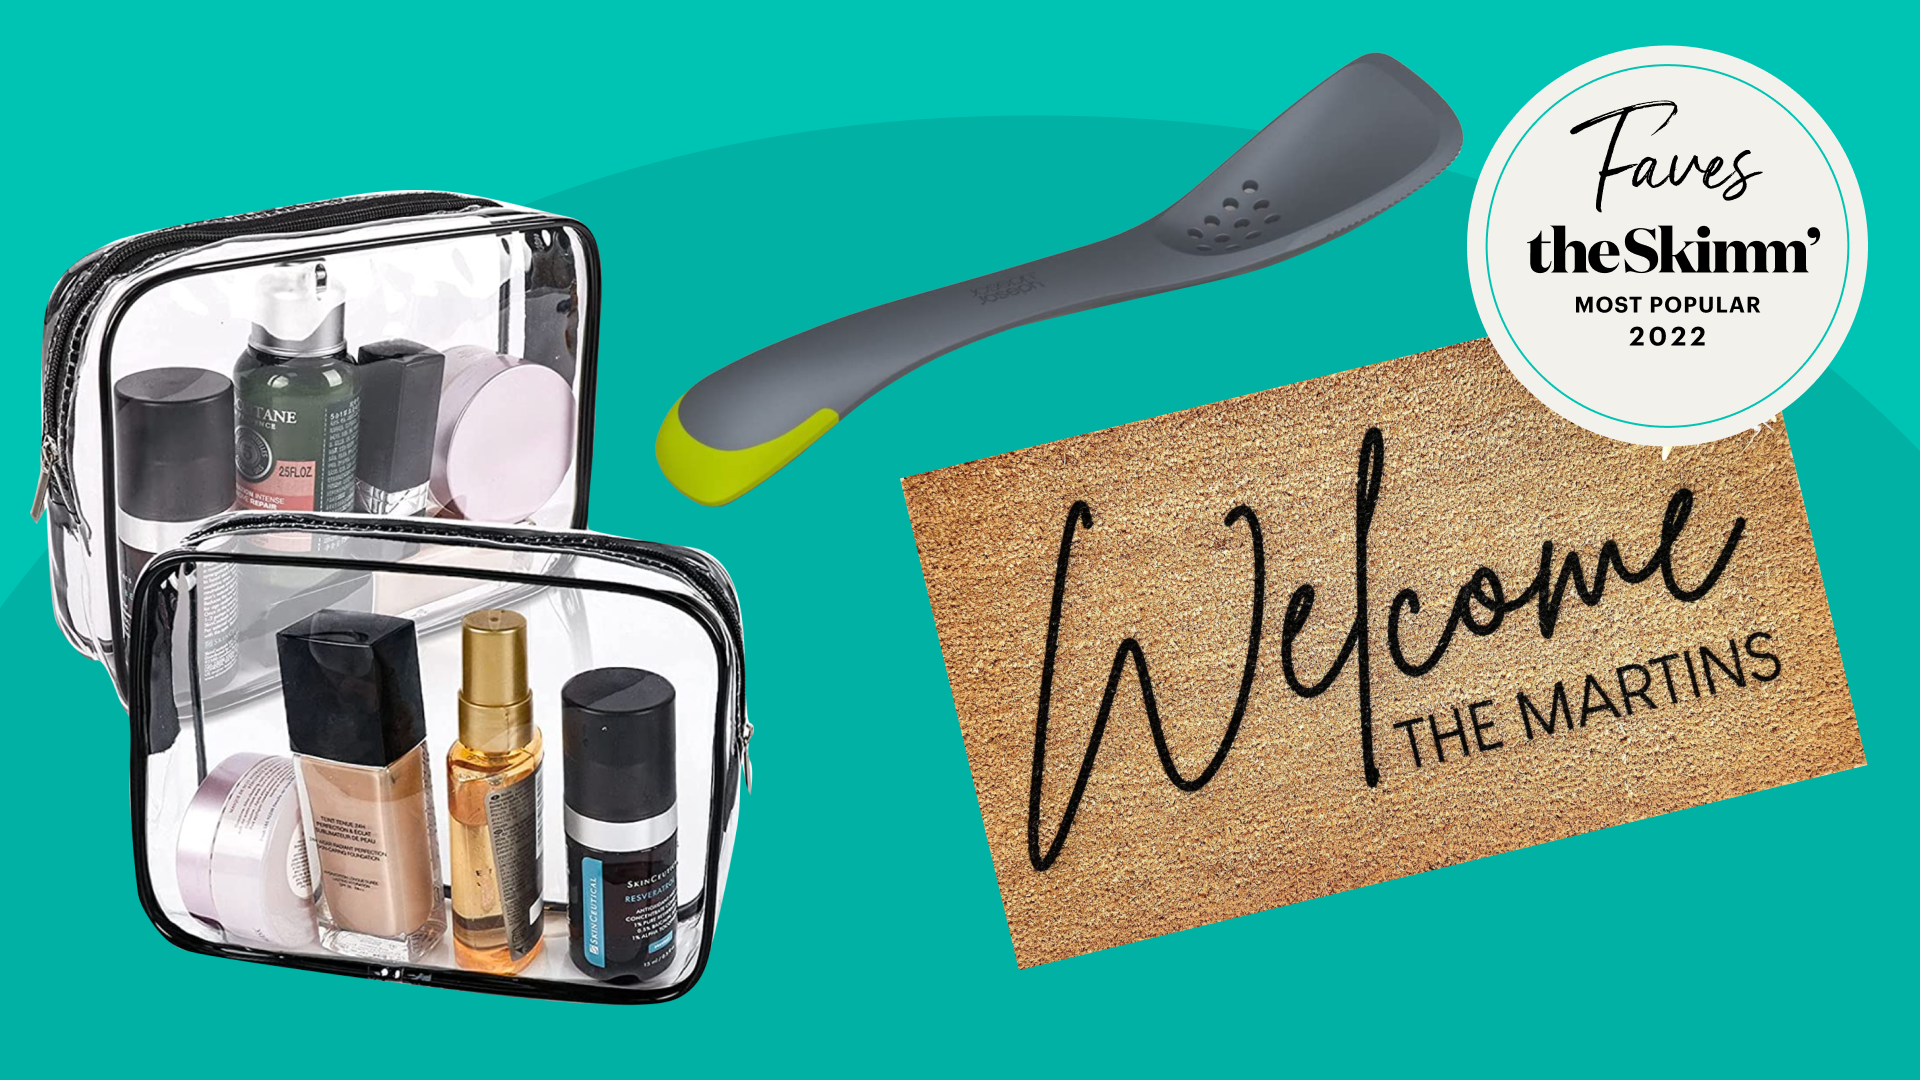 Bestselling Kitchen Items on